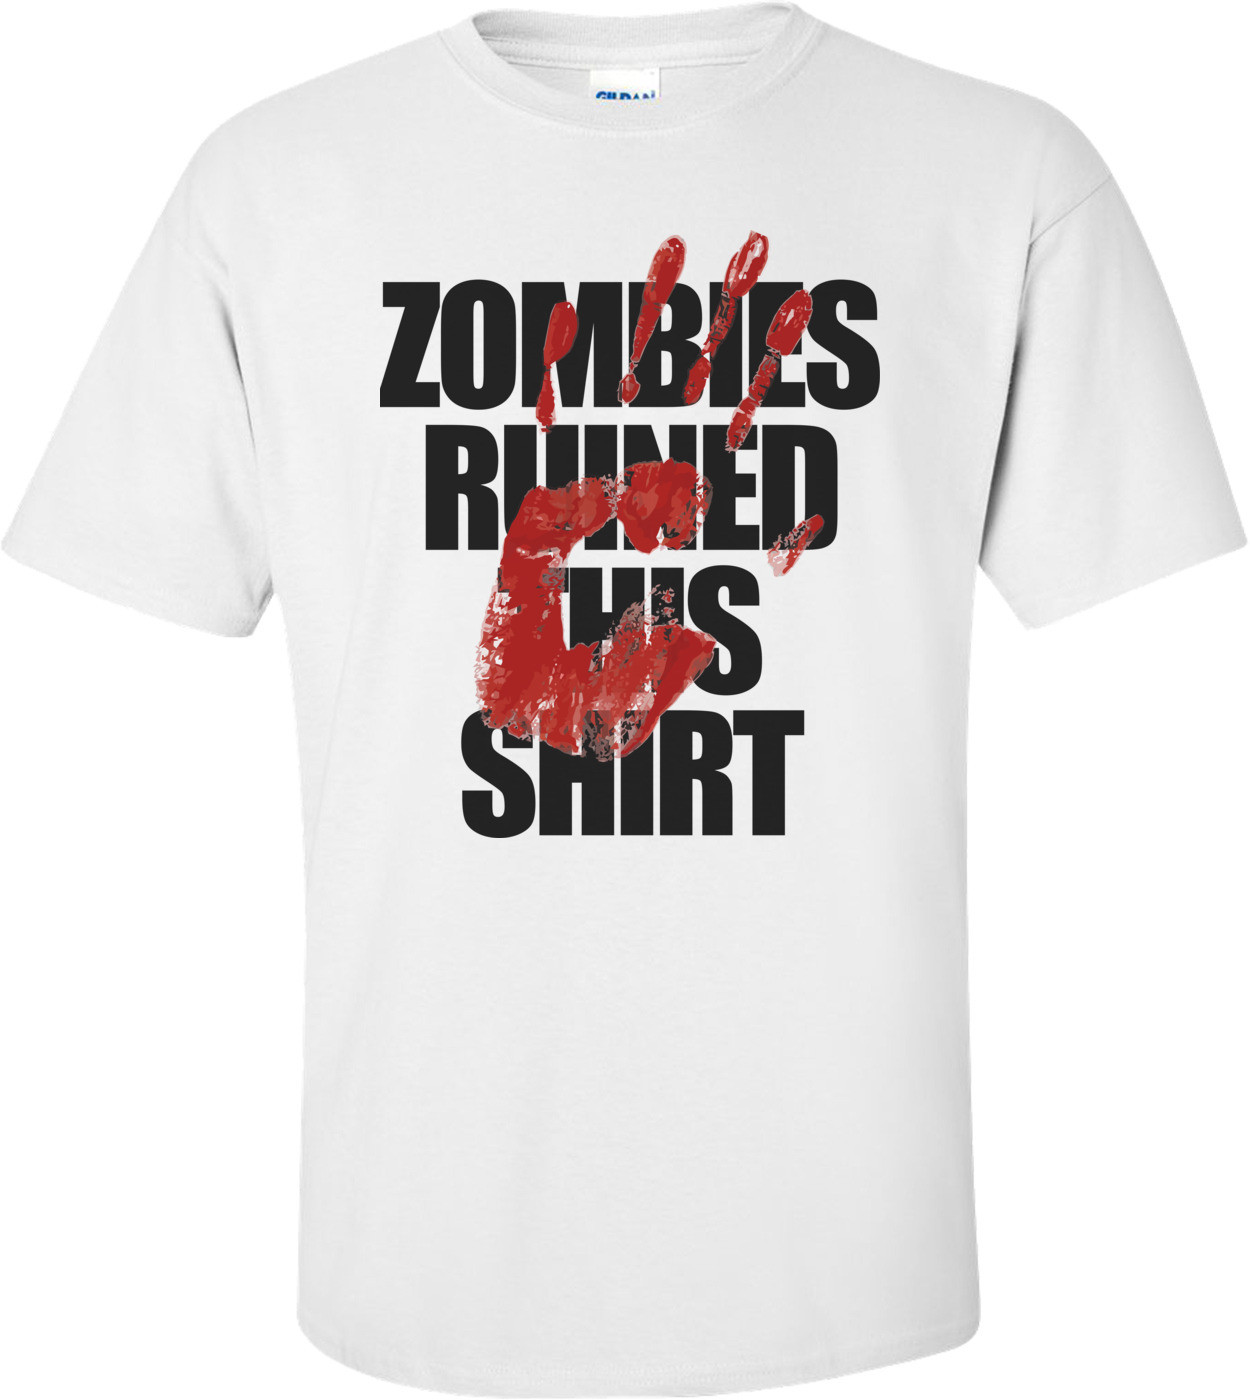 Zombies Ruined This - Cool Zombie